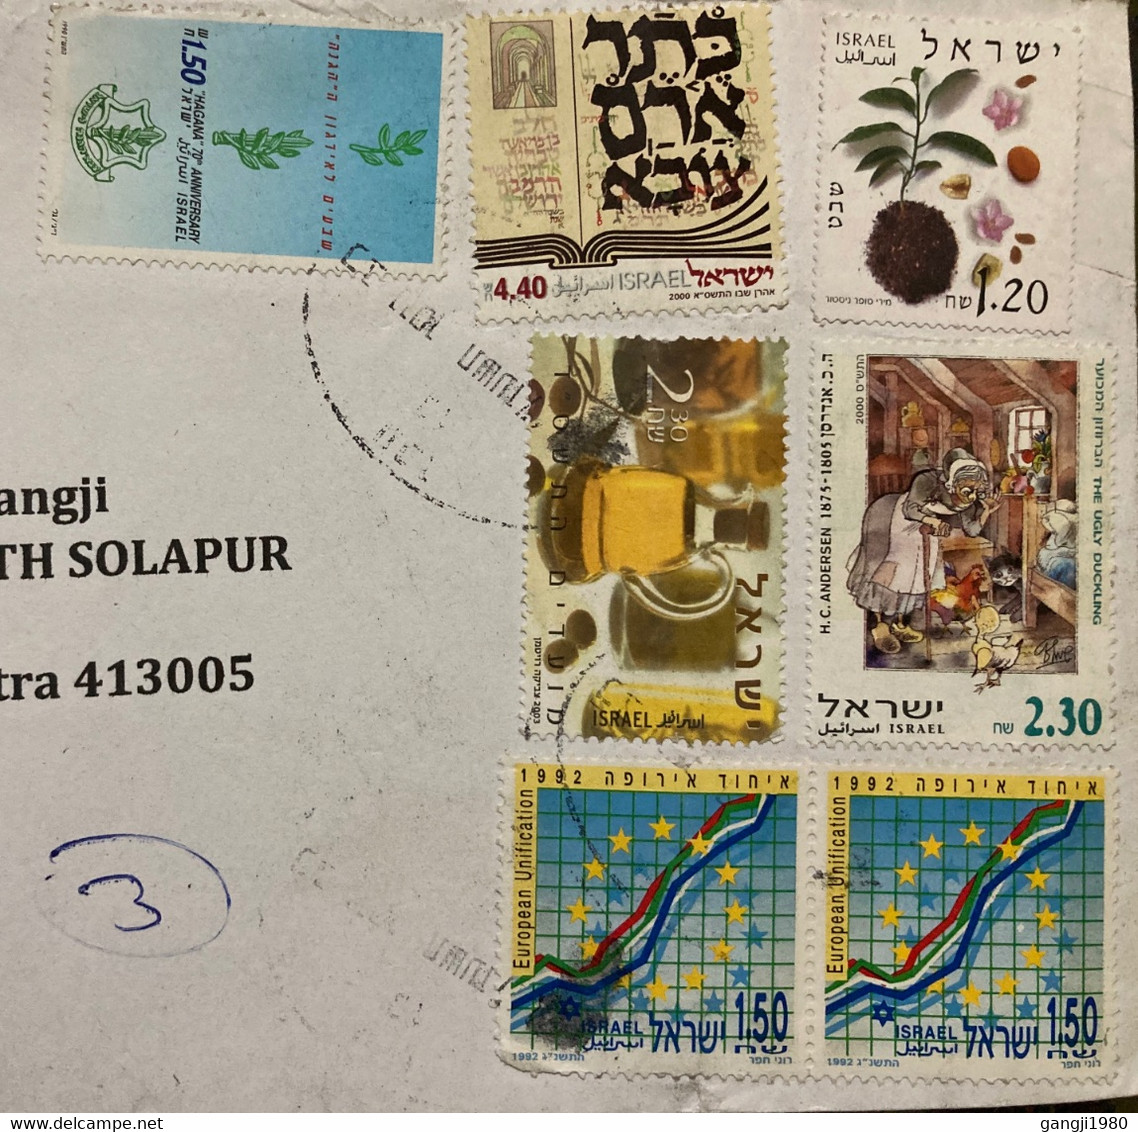 ISRAEL 1992, EUROPE UNIFICATION,OLD WOMEN,DUCK ,PLANT ,HAGNA ART ,JUG ,BOTTLE,7 STAMPS ,REGISTER,AIRMAIL COVER TO INDIA - Briefe U. Dokumente